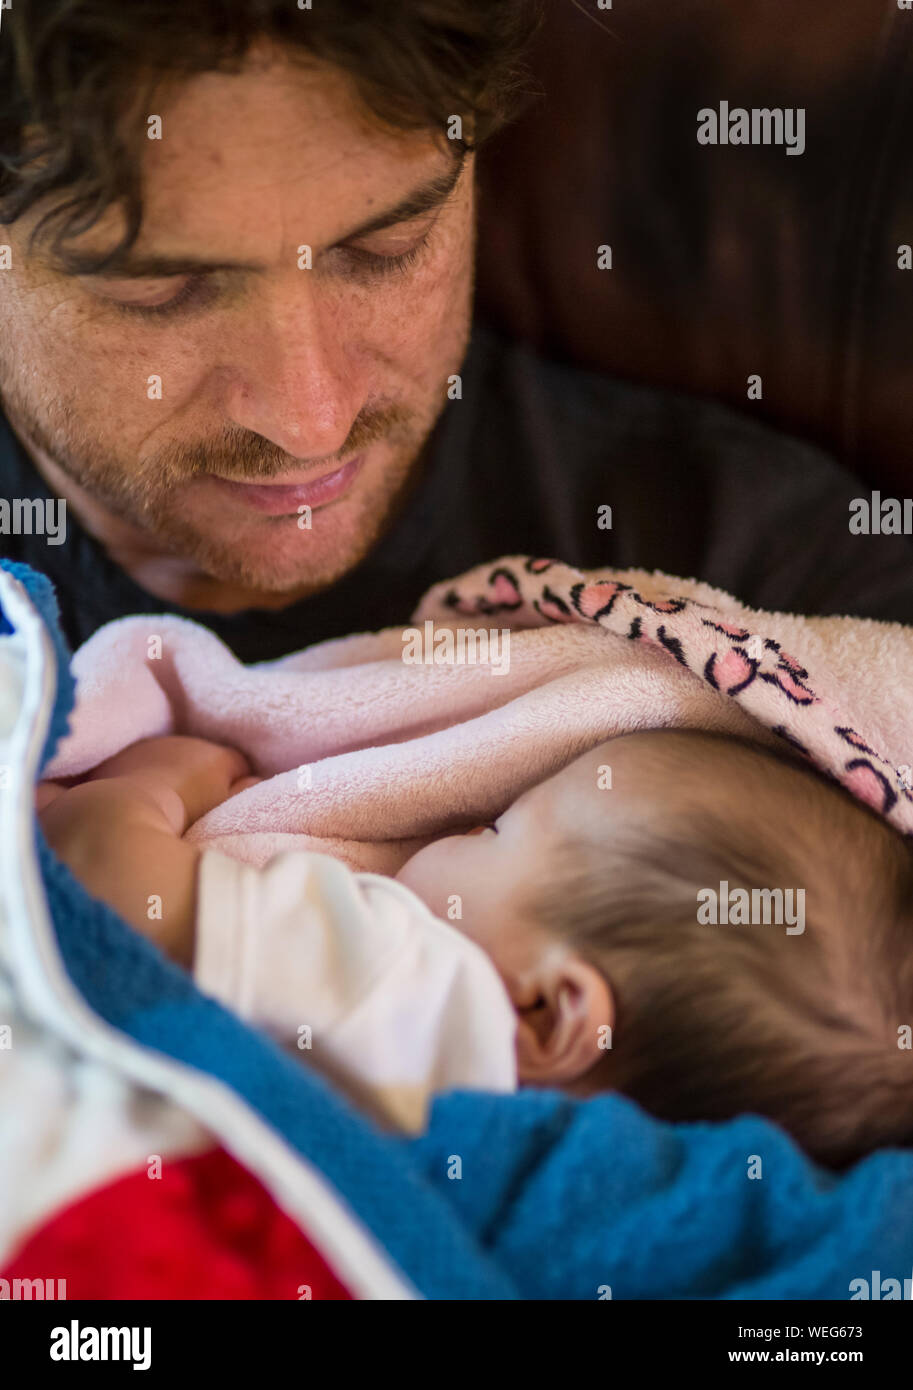 Caucasian father holding and looking at very young baby, close up Stock Photo